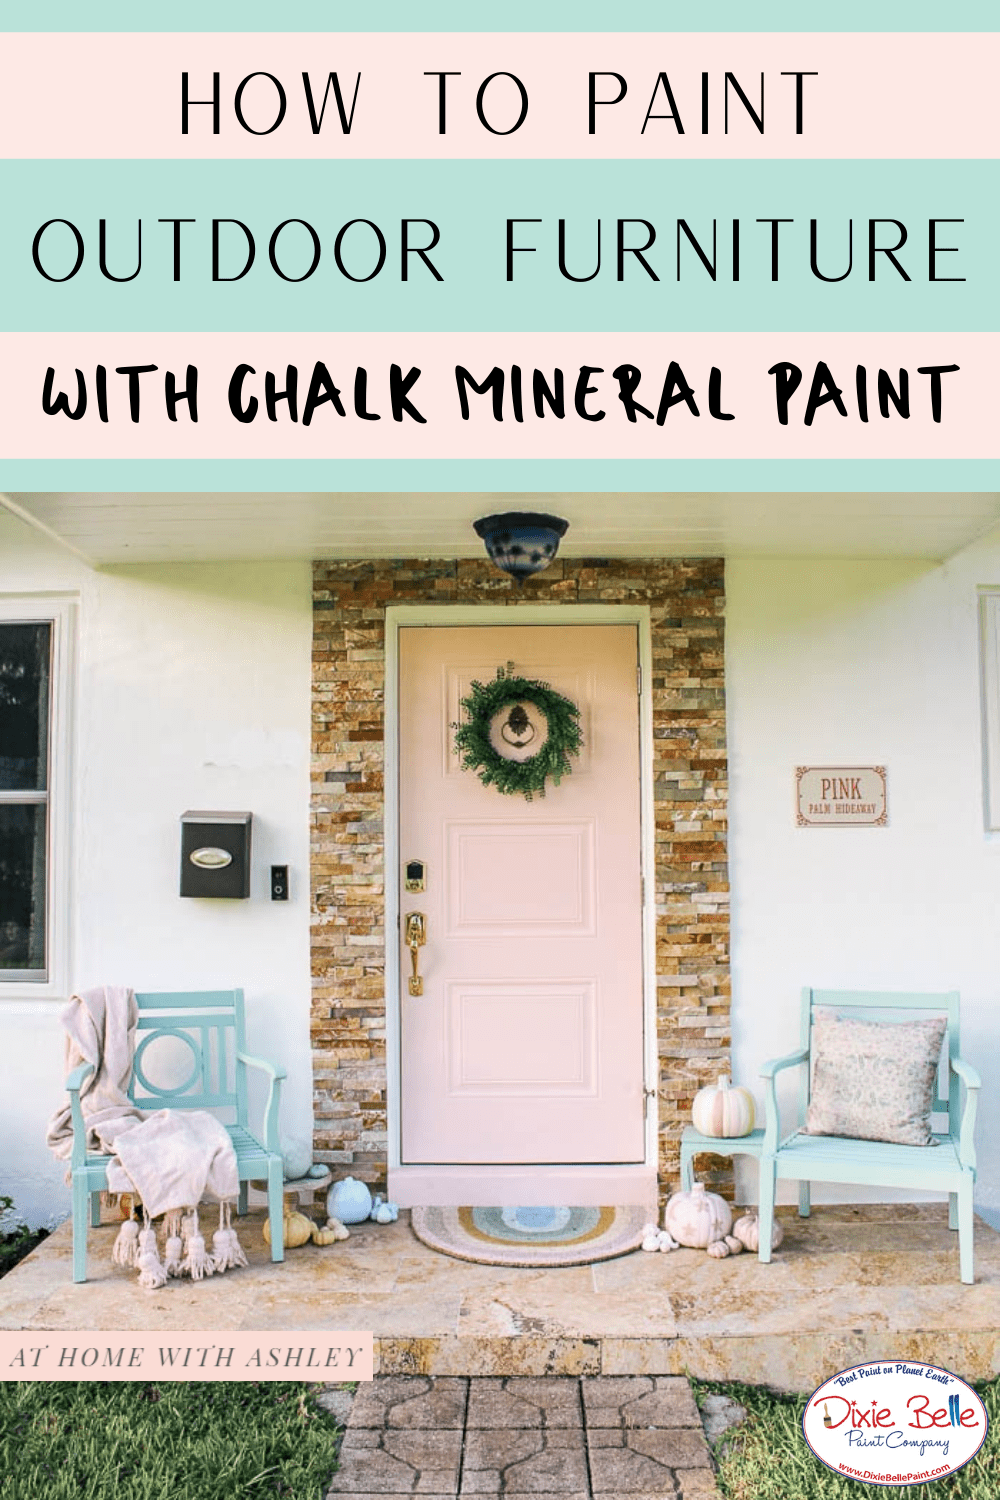 Can You Use Chalk Paint For Outdoor Furniture?